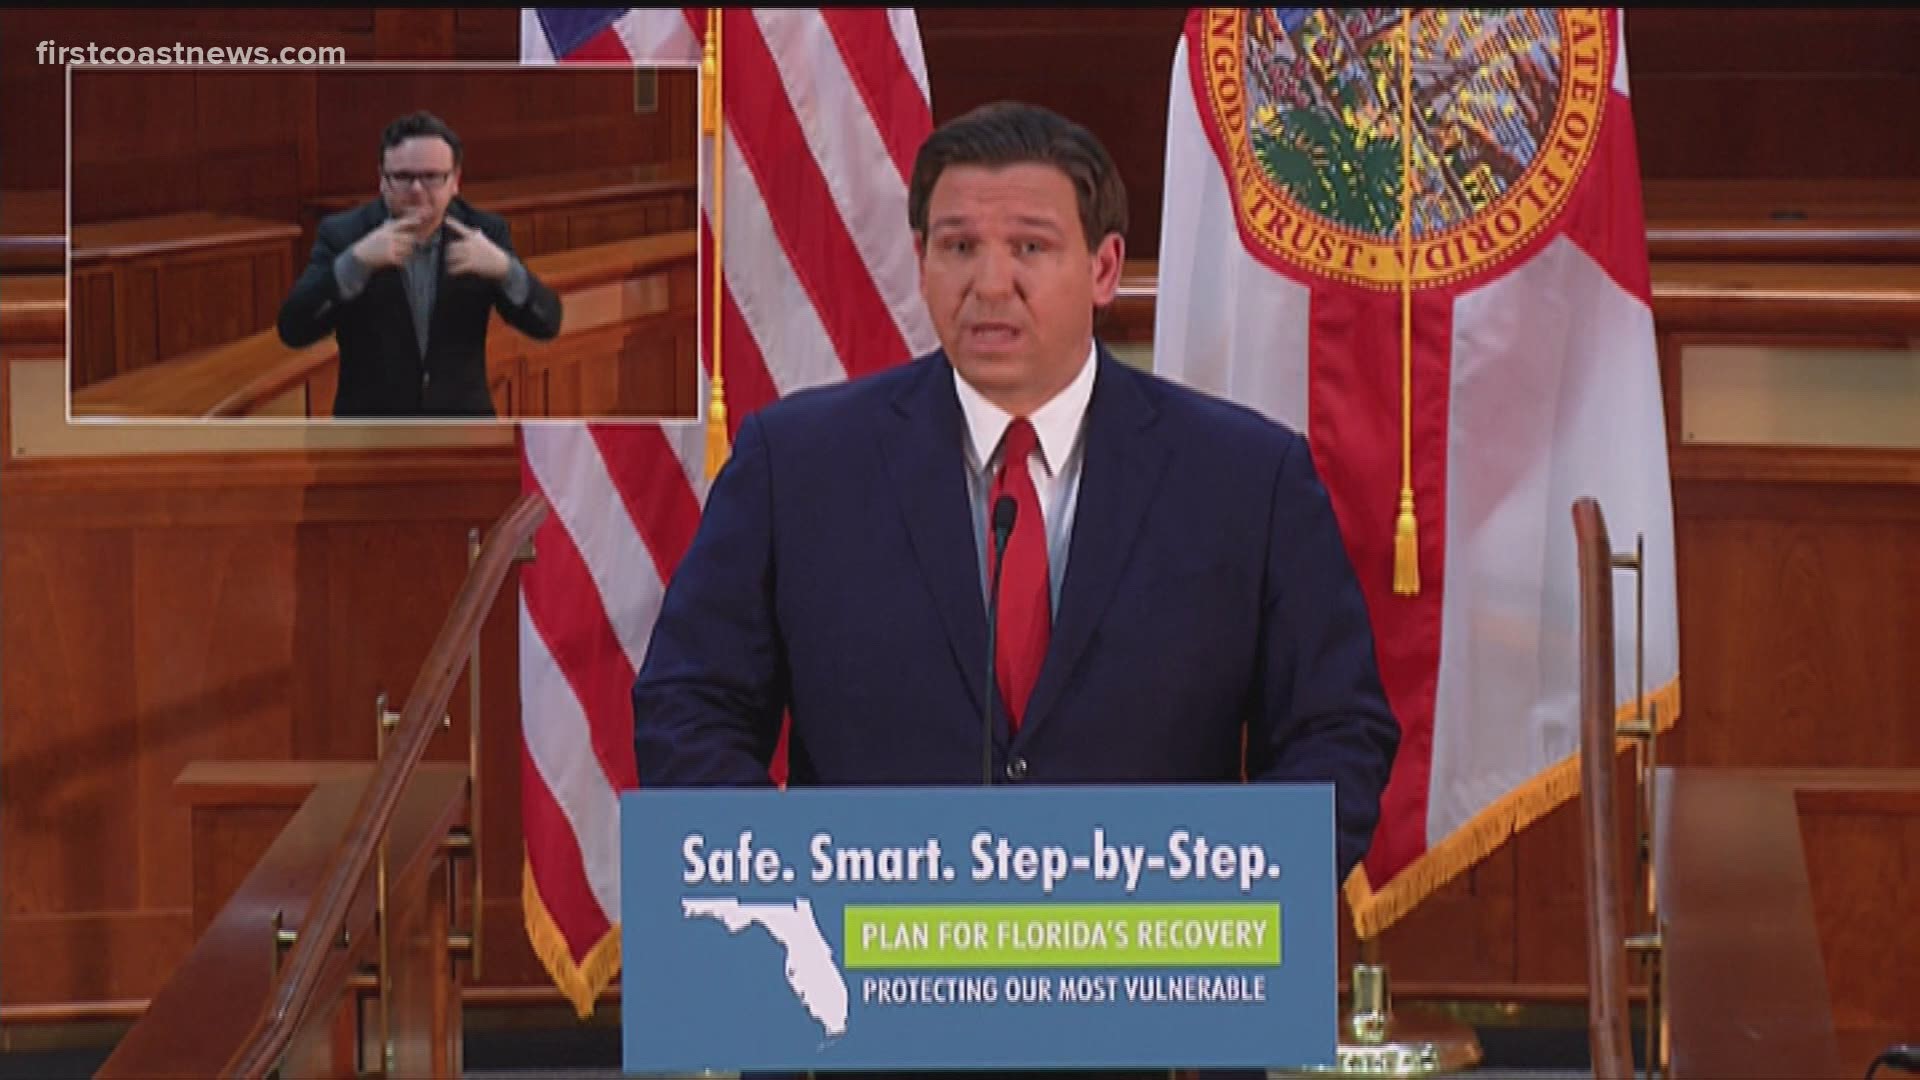 "Together, we will get through this difficult chapter," Gov. DeSantis said. "Our fight against COVID shouldn't lead us to deprive our kids of the tools they need."